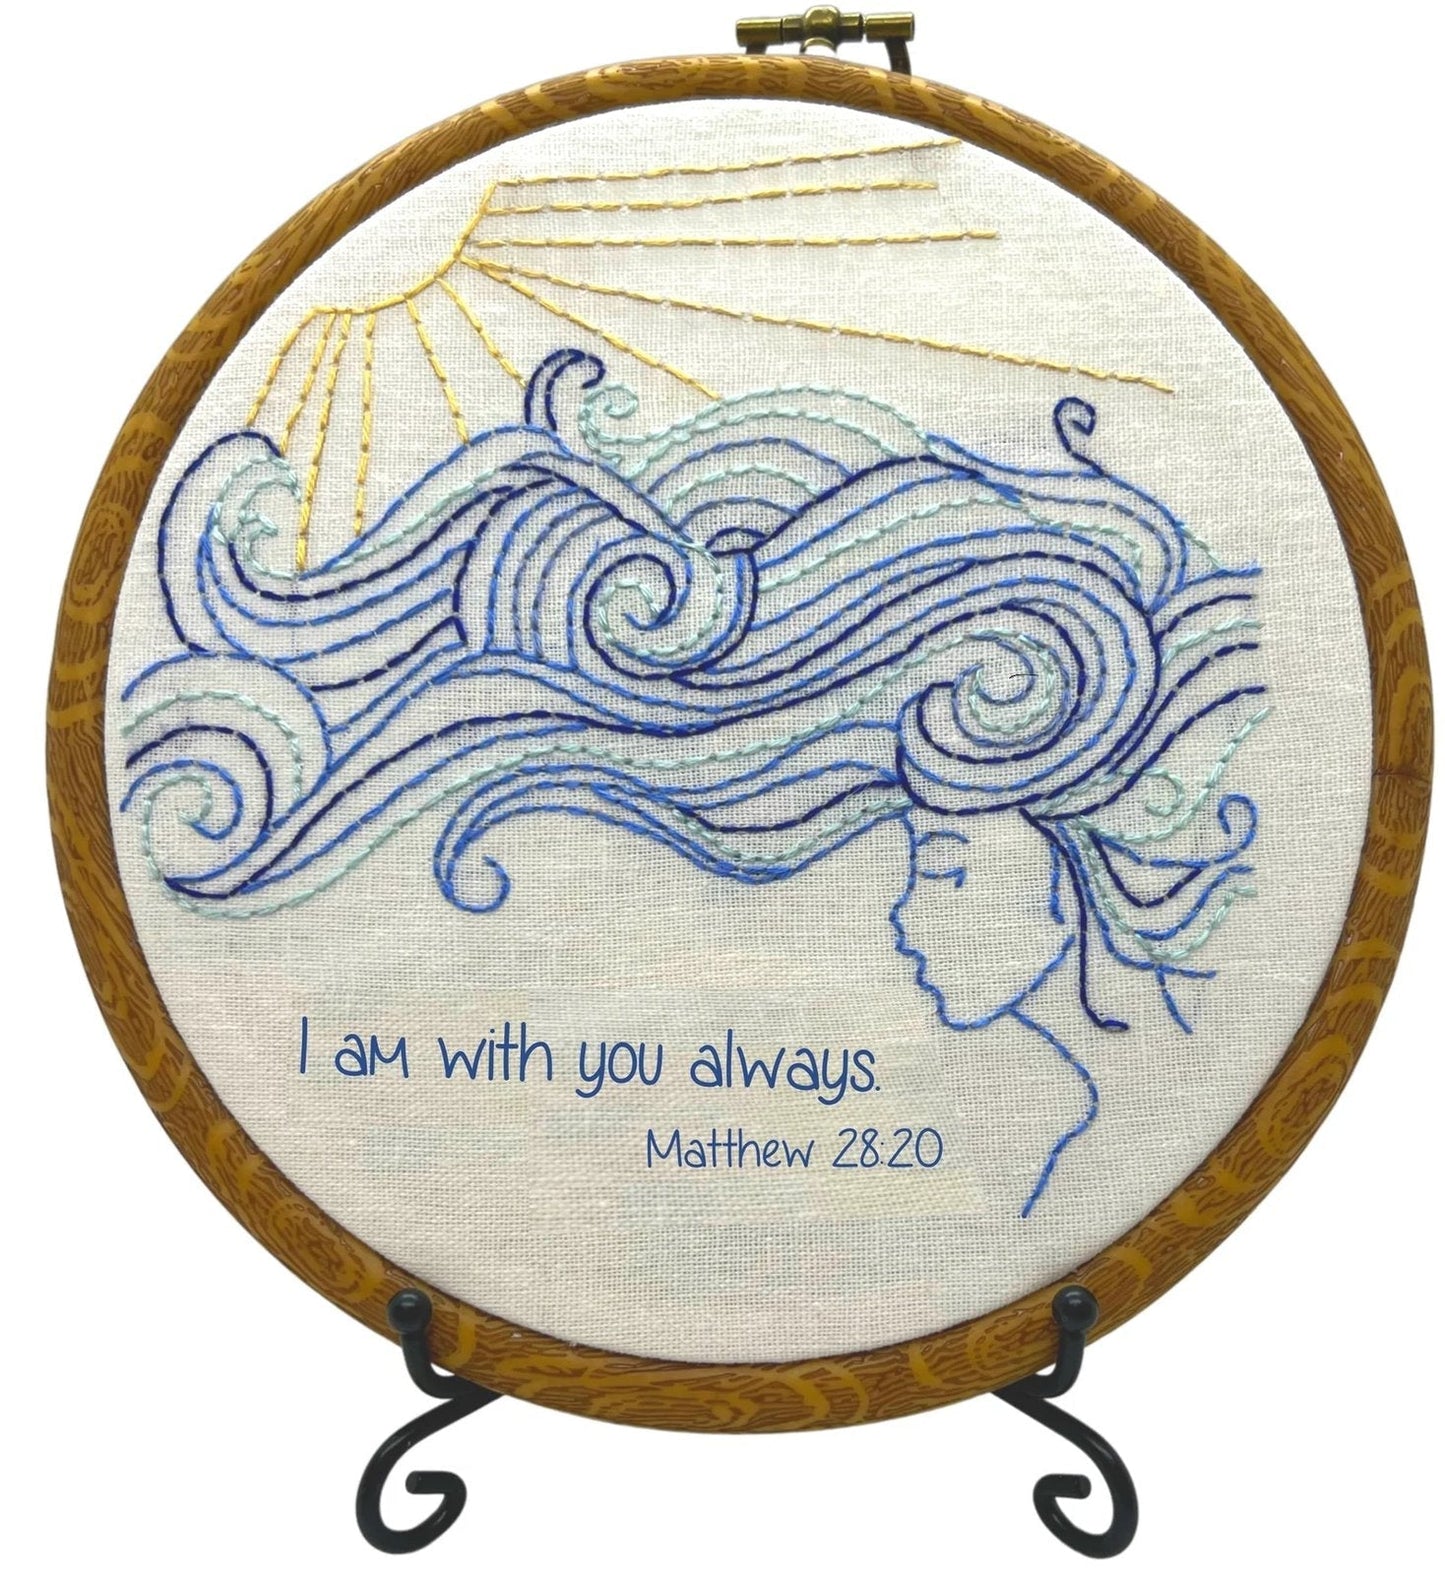 6" Beach Vibes Embroidery Pattern PDF Download